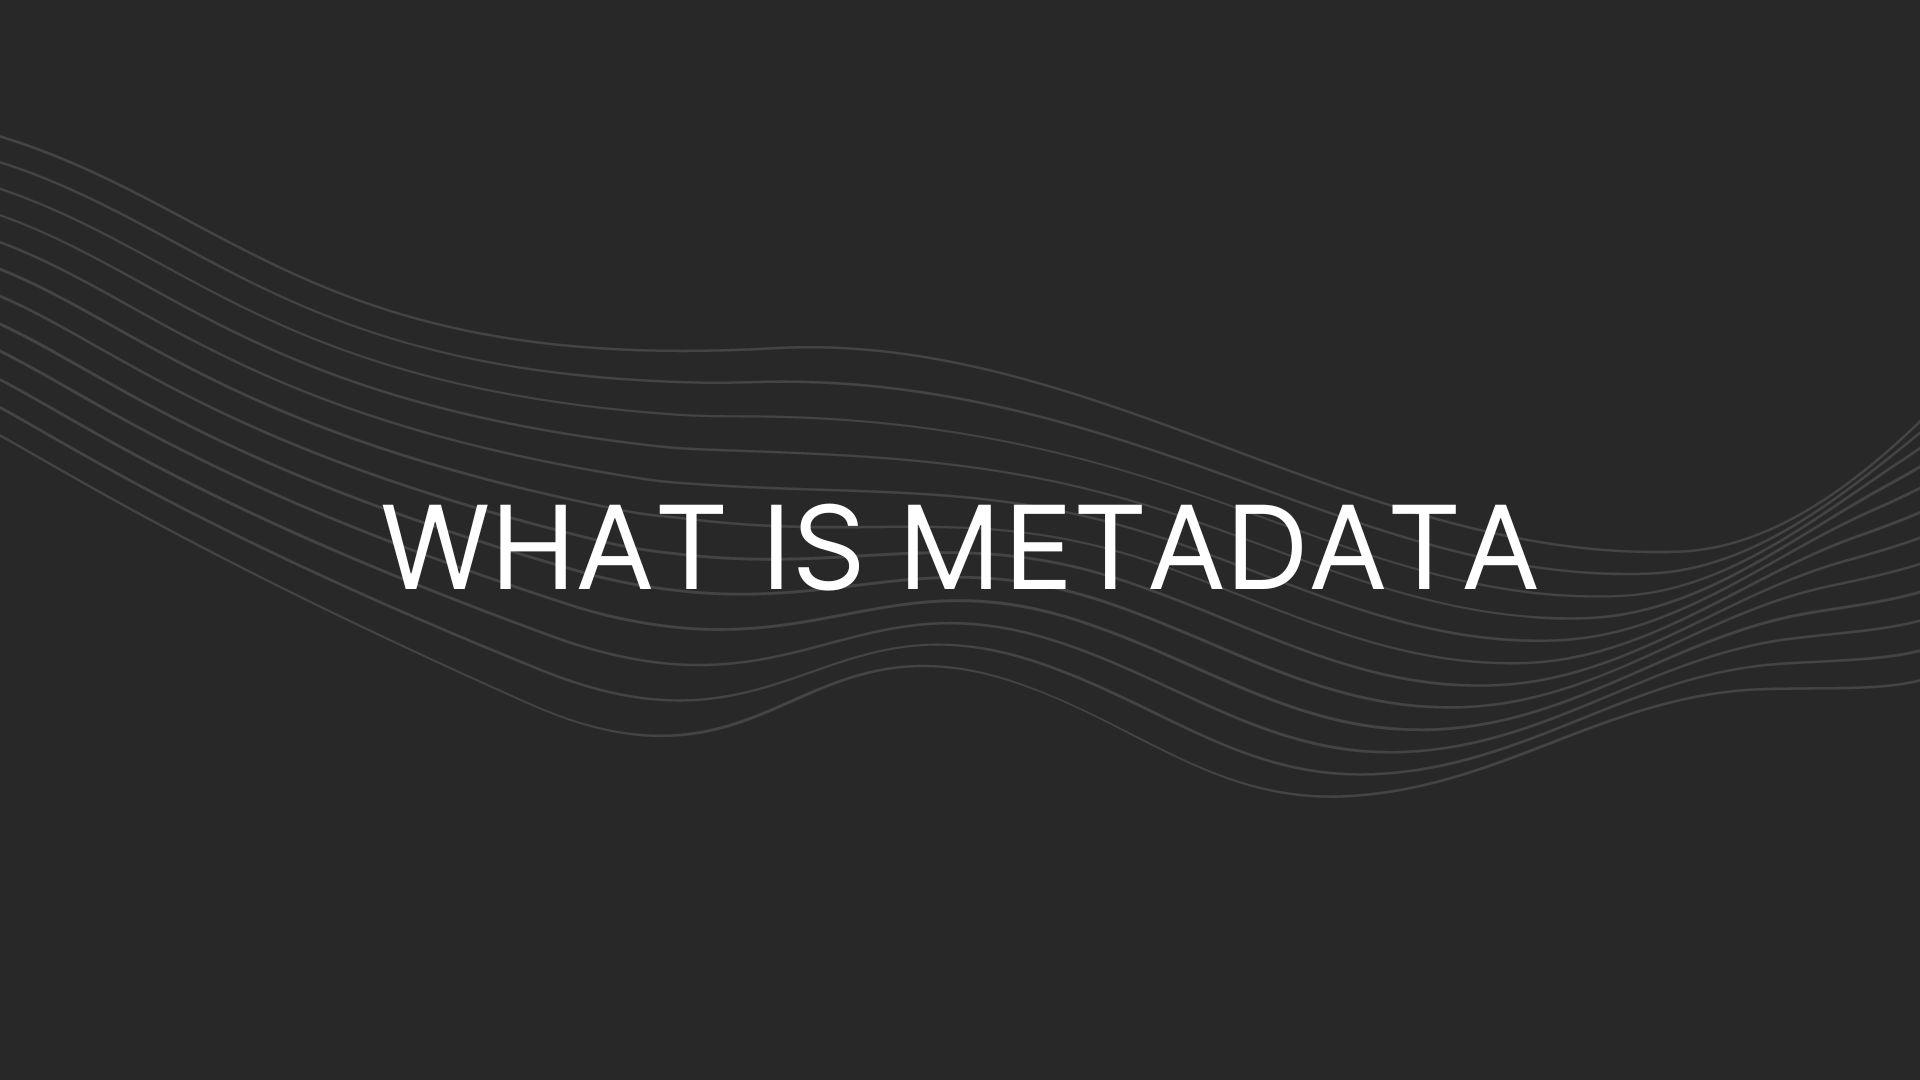 what is metadata